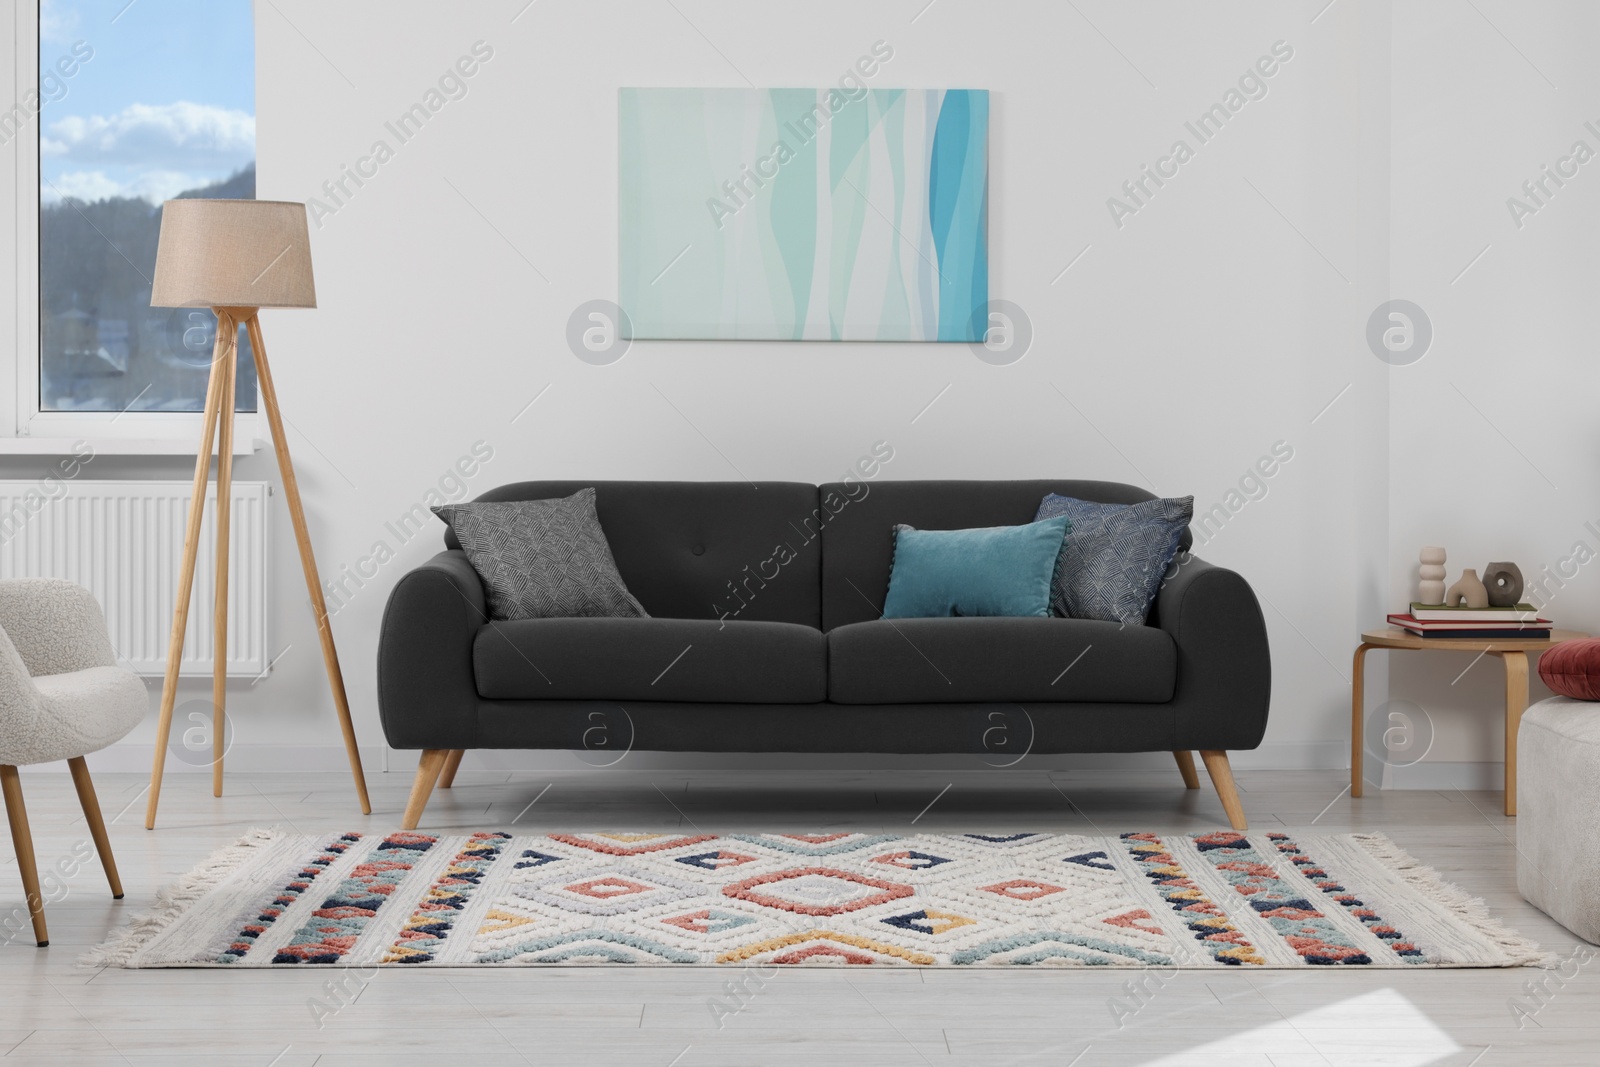 Photo of Living room with beautiful carpet and furniture